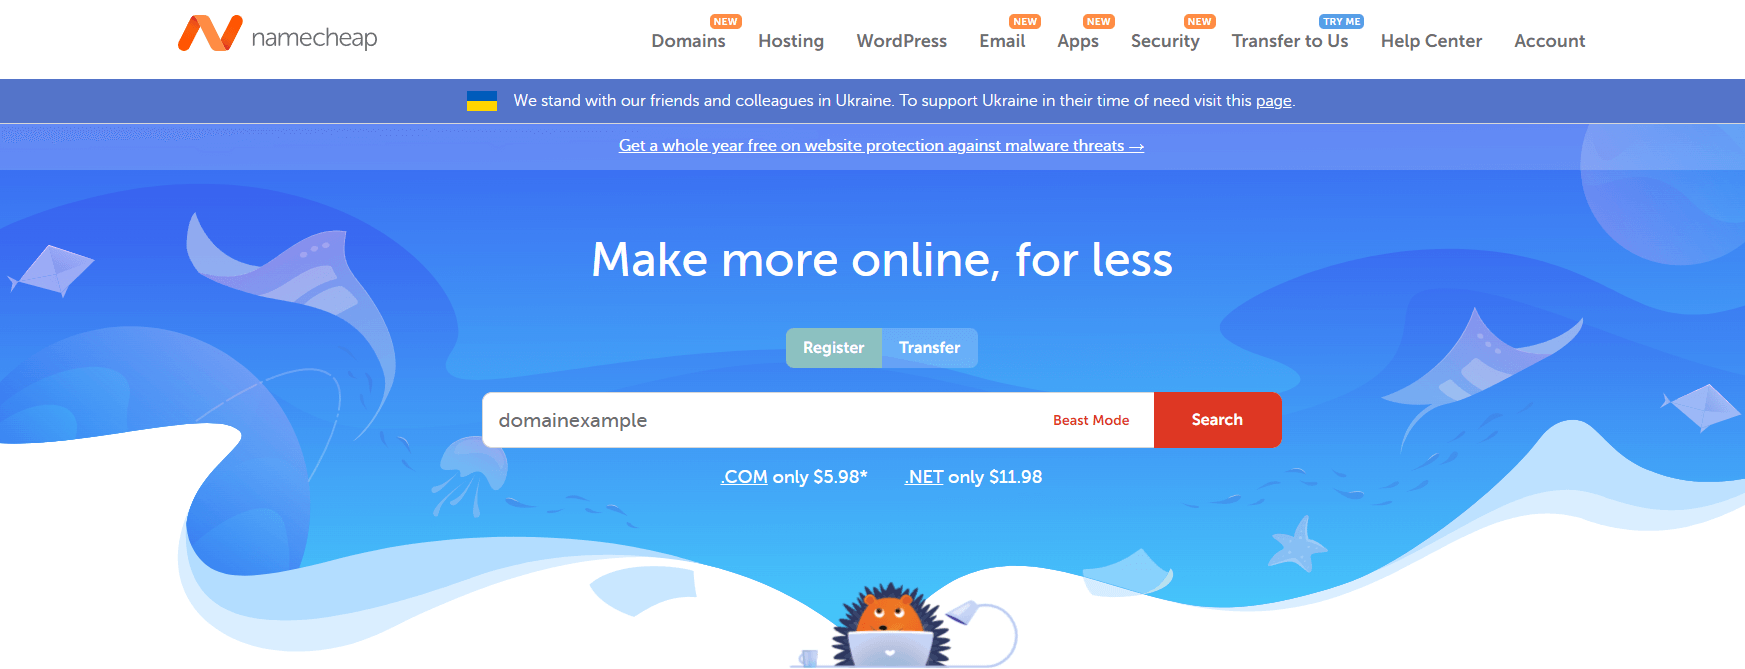 Namecheap search for "domainexample"